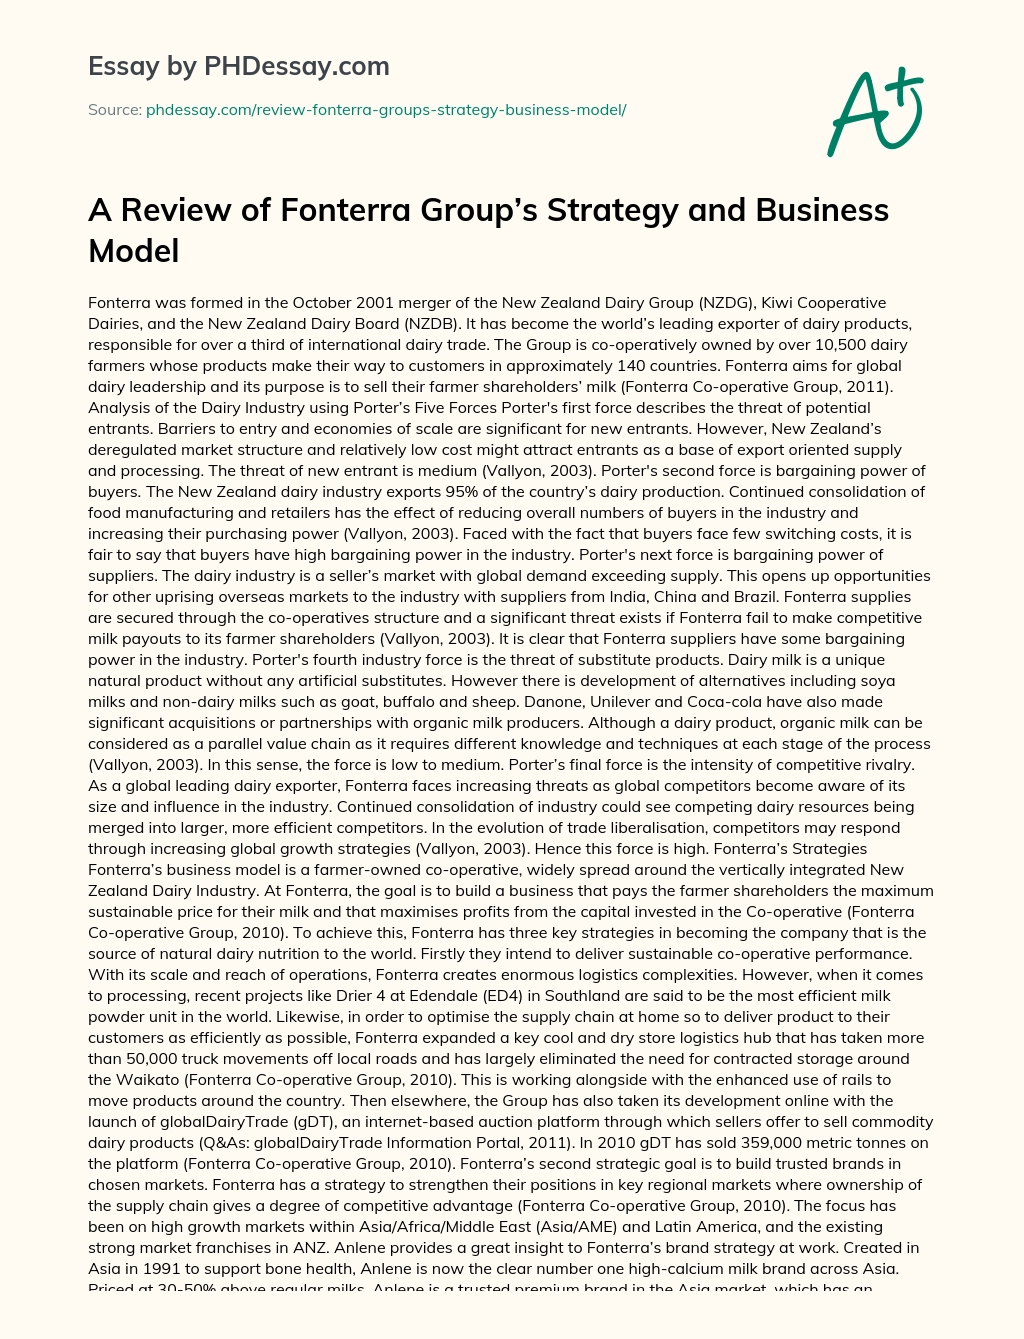 A Review of Fonterra Group’s Strategy and Business Model essay